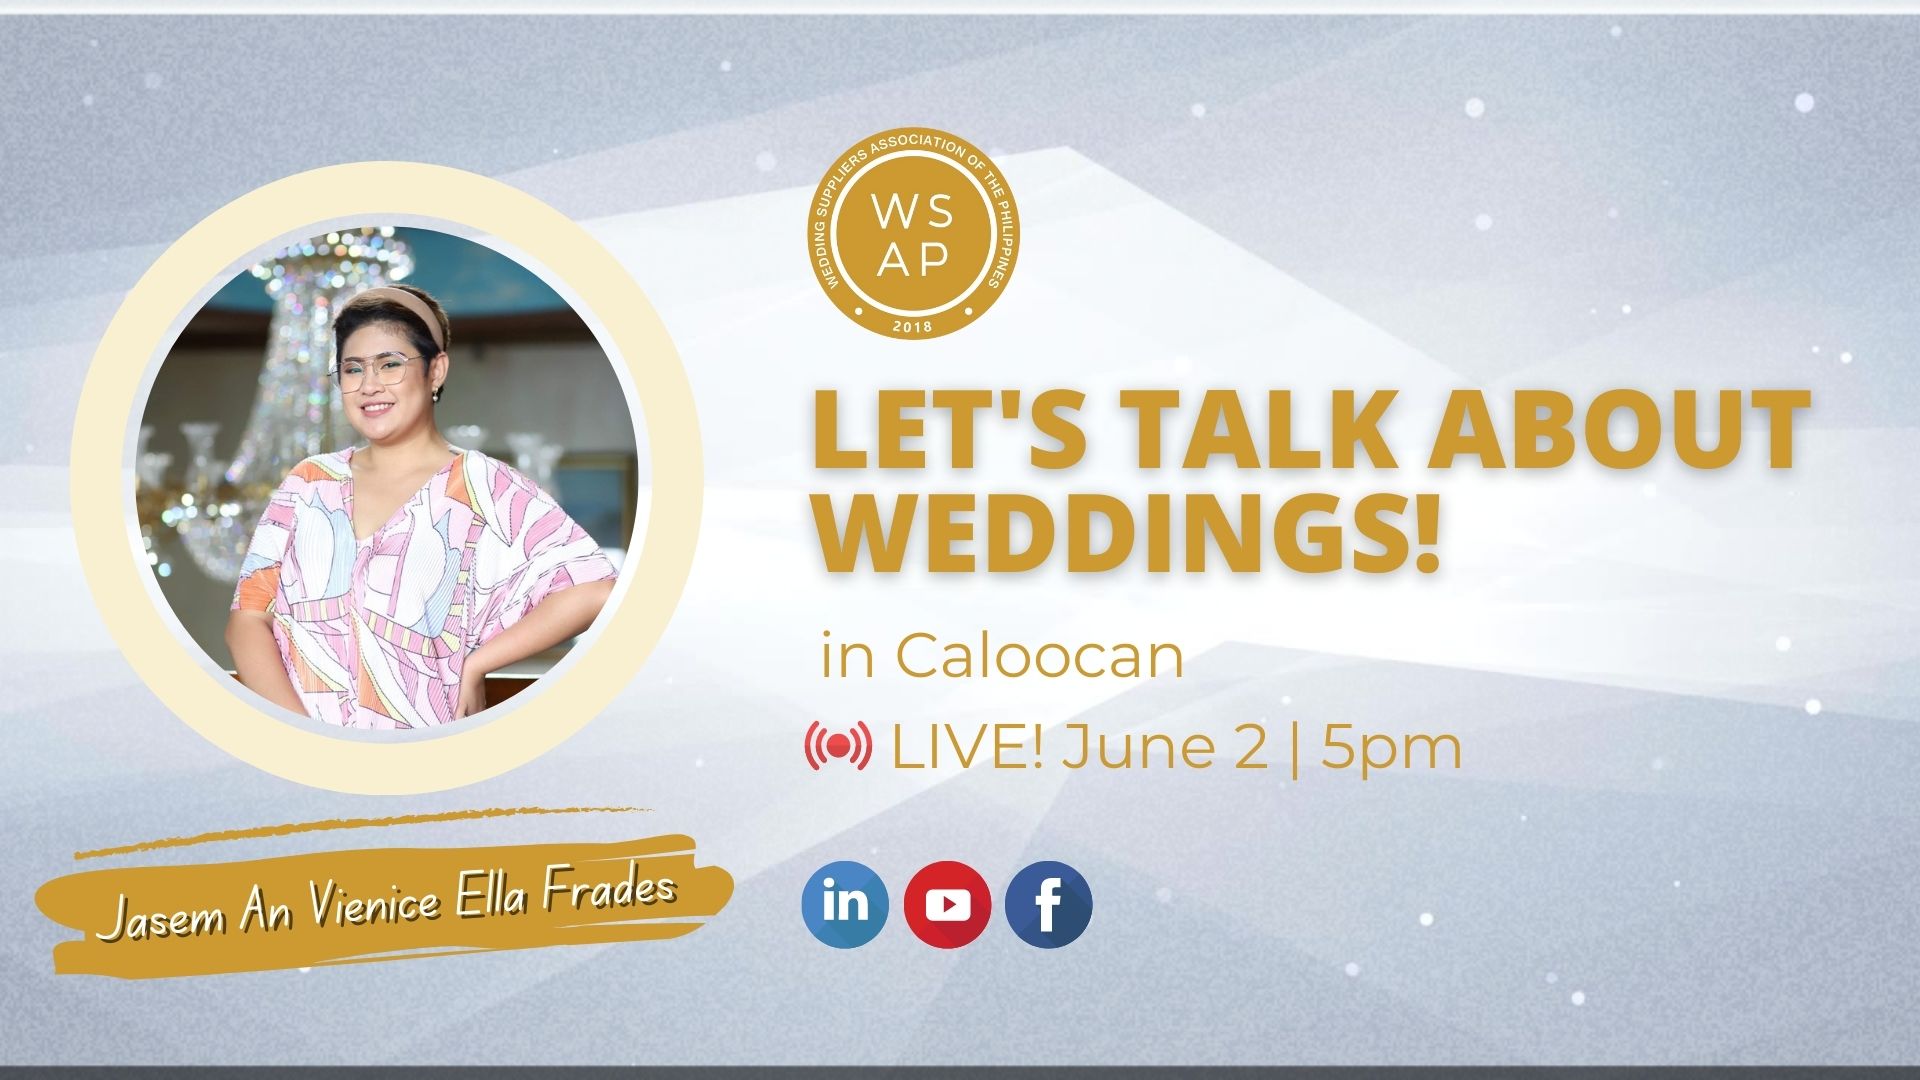 Let's Talk About Weddings in Caloocan with Jasem An Vienice Ella Frades